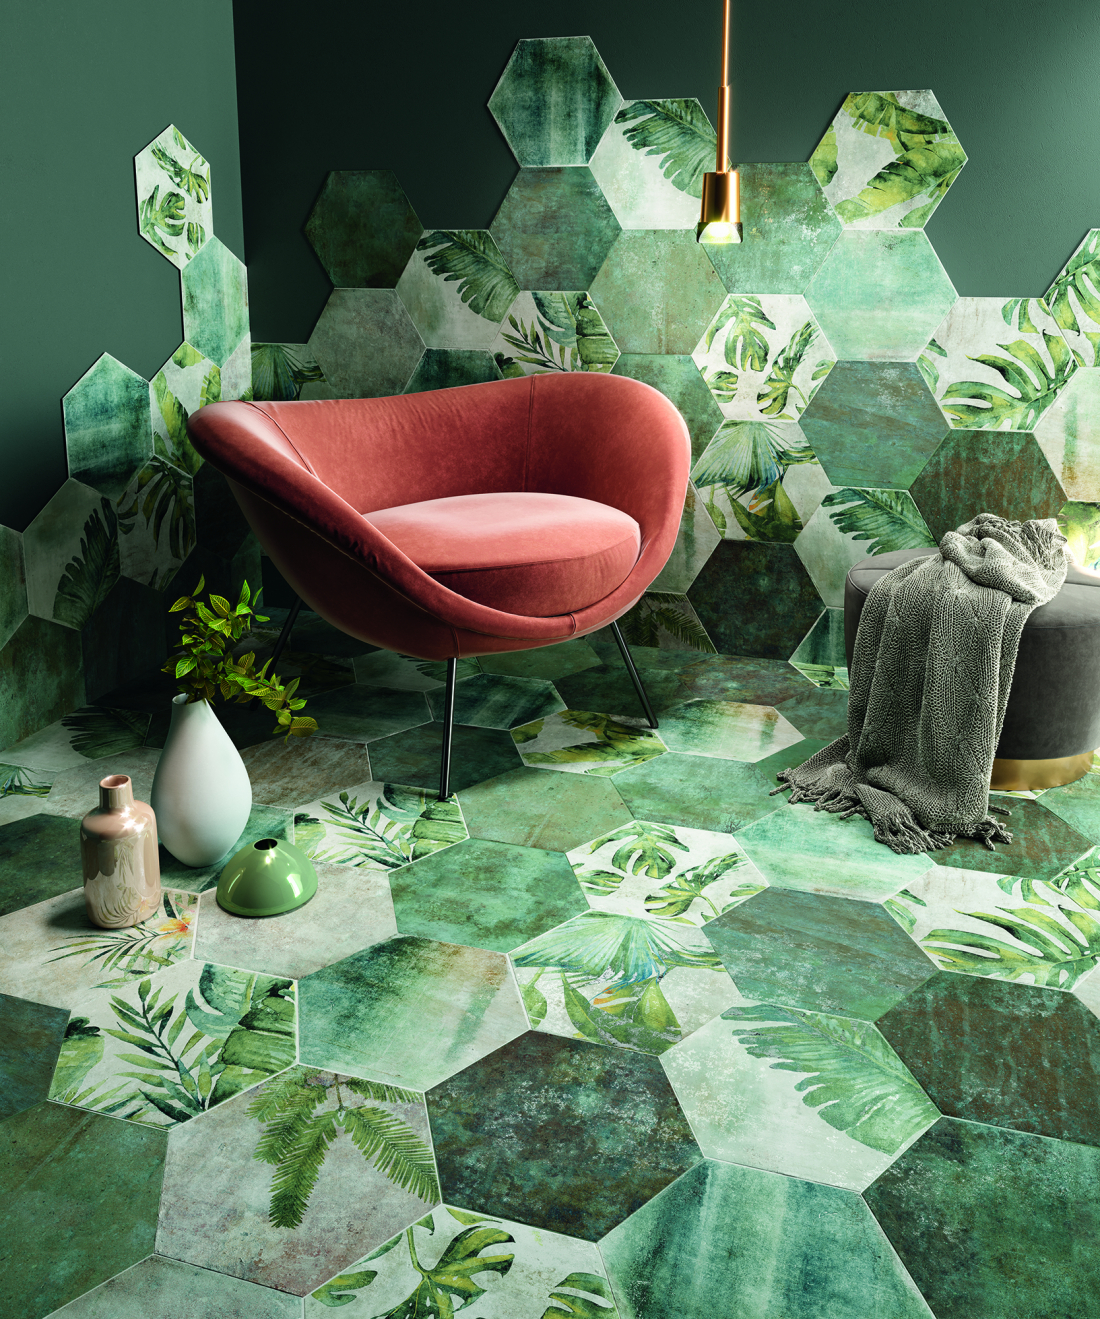 Tile of Spain Trends - Painted Effects - Amazonia By Colorker